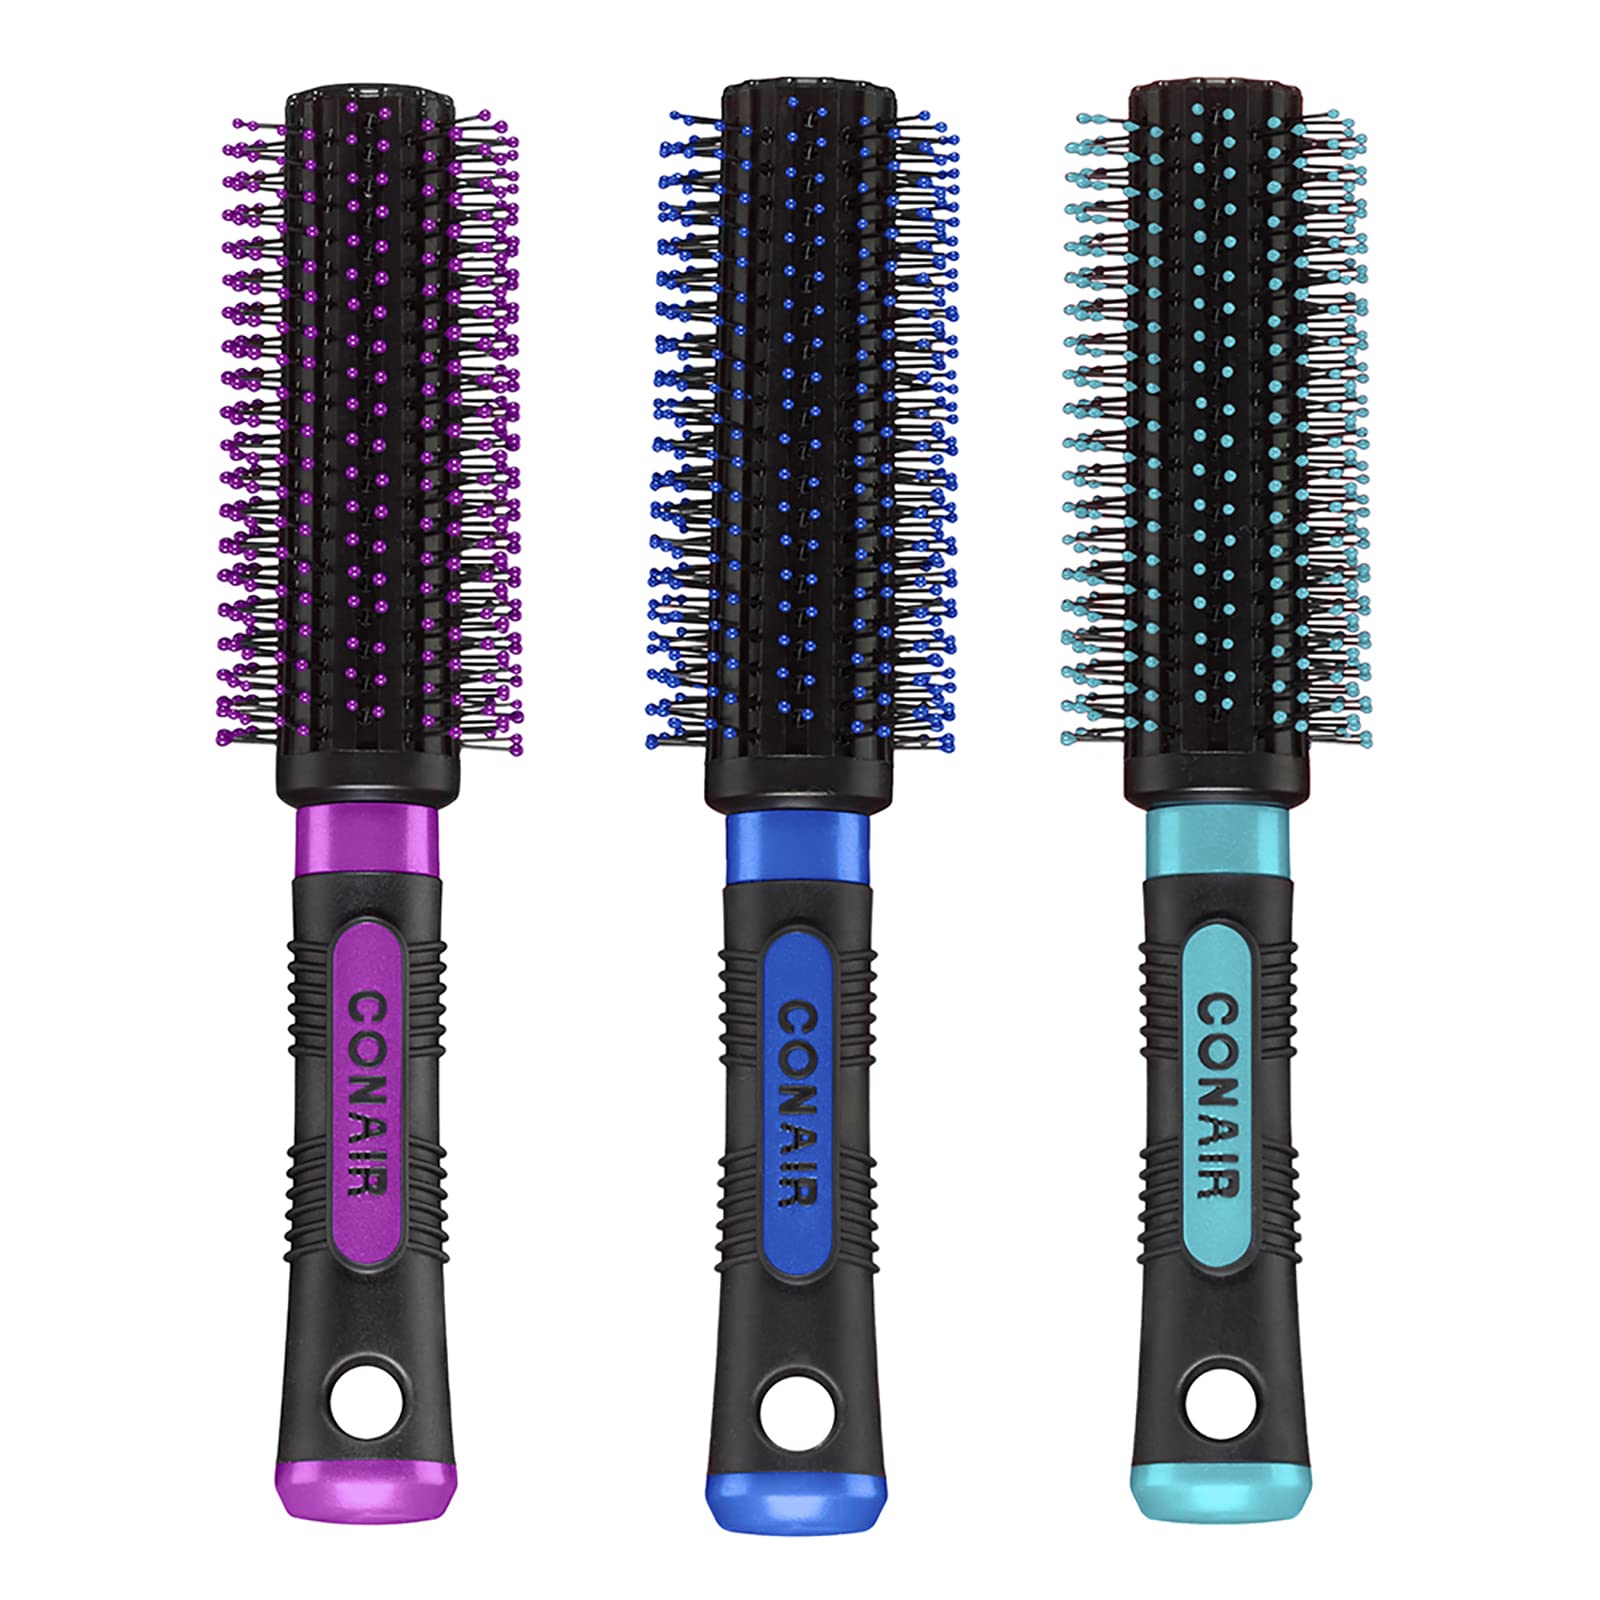 Conair Salon Results Round Brush for Blow-Drying, Hairbrush for Short to Medium Hair Length, Color May Vary, 1 Pack